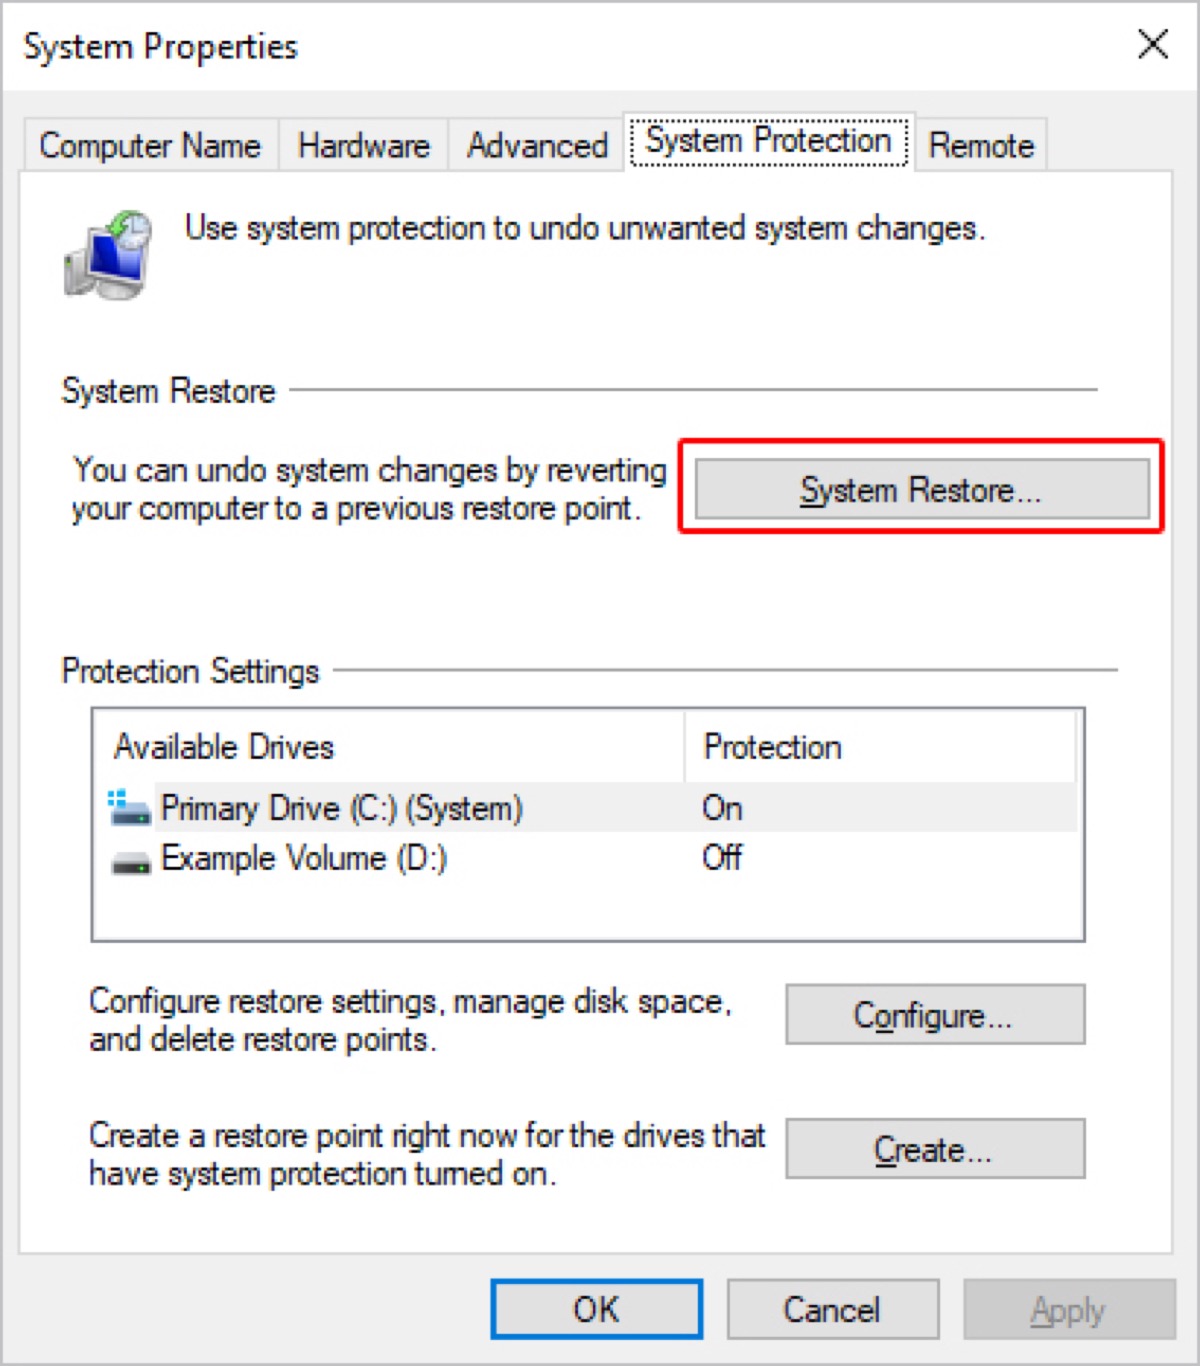 Restore system from System Prpperties